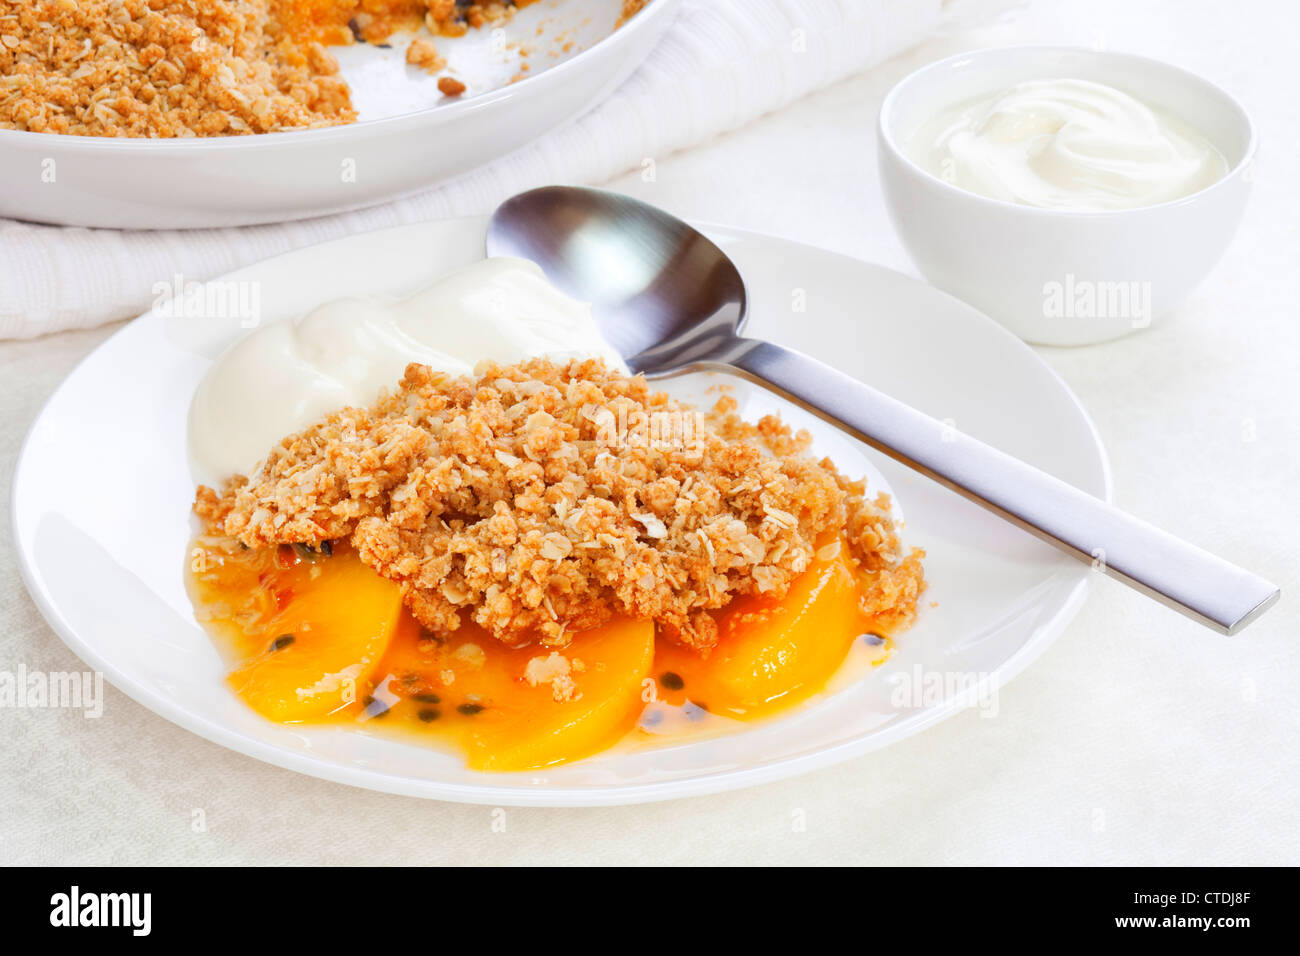 An unusual fruit crumble with peach and passion fruit. The crumble contains wholemeal flour, brown sugar and oats. Stock Photo